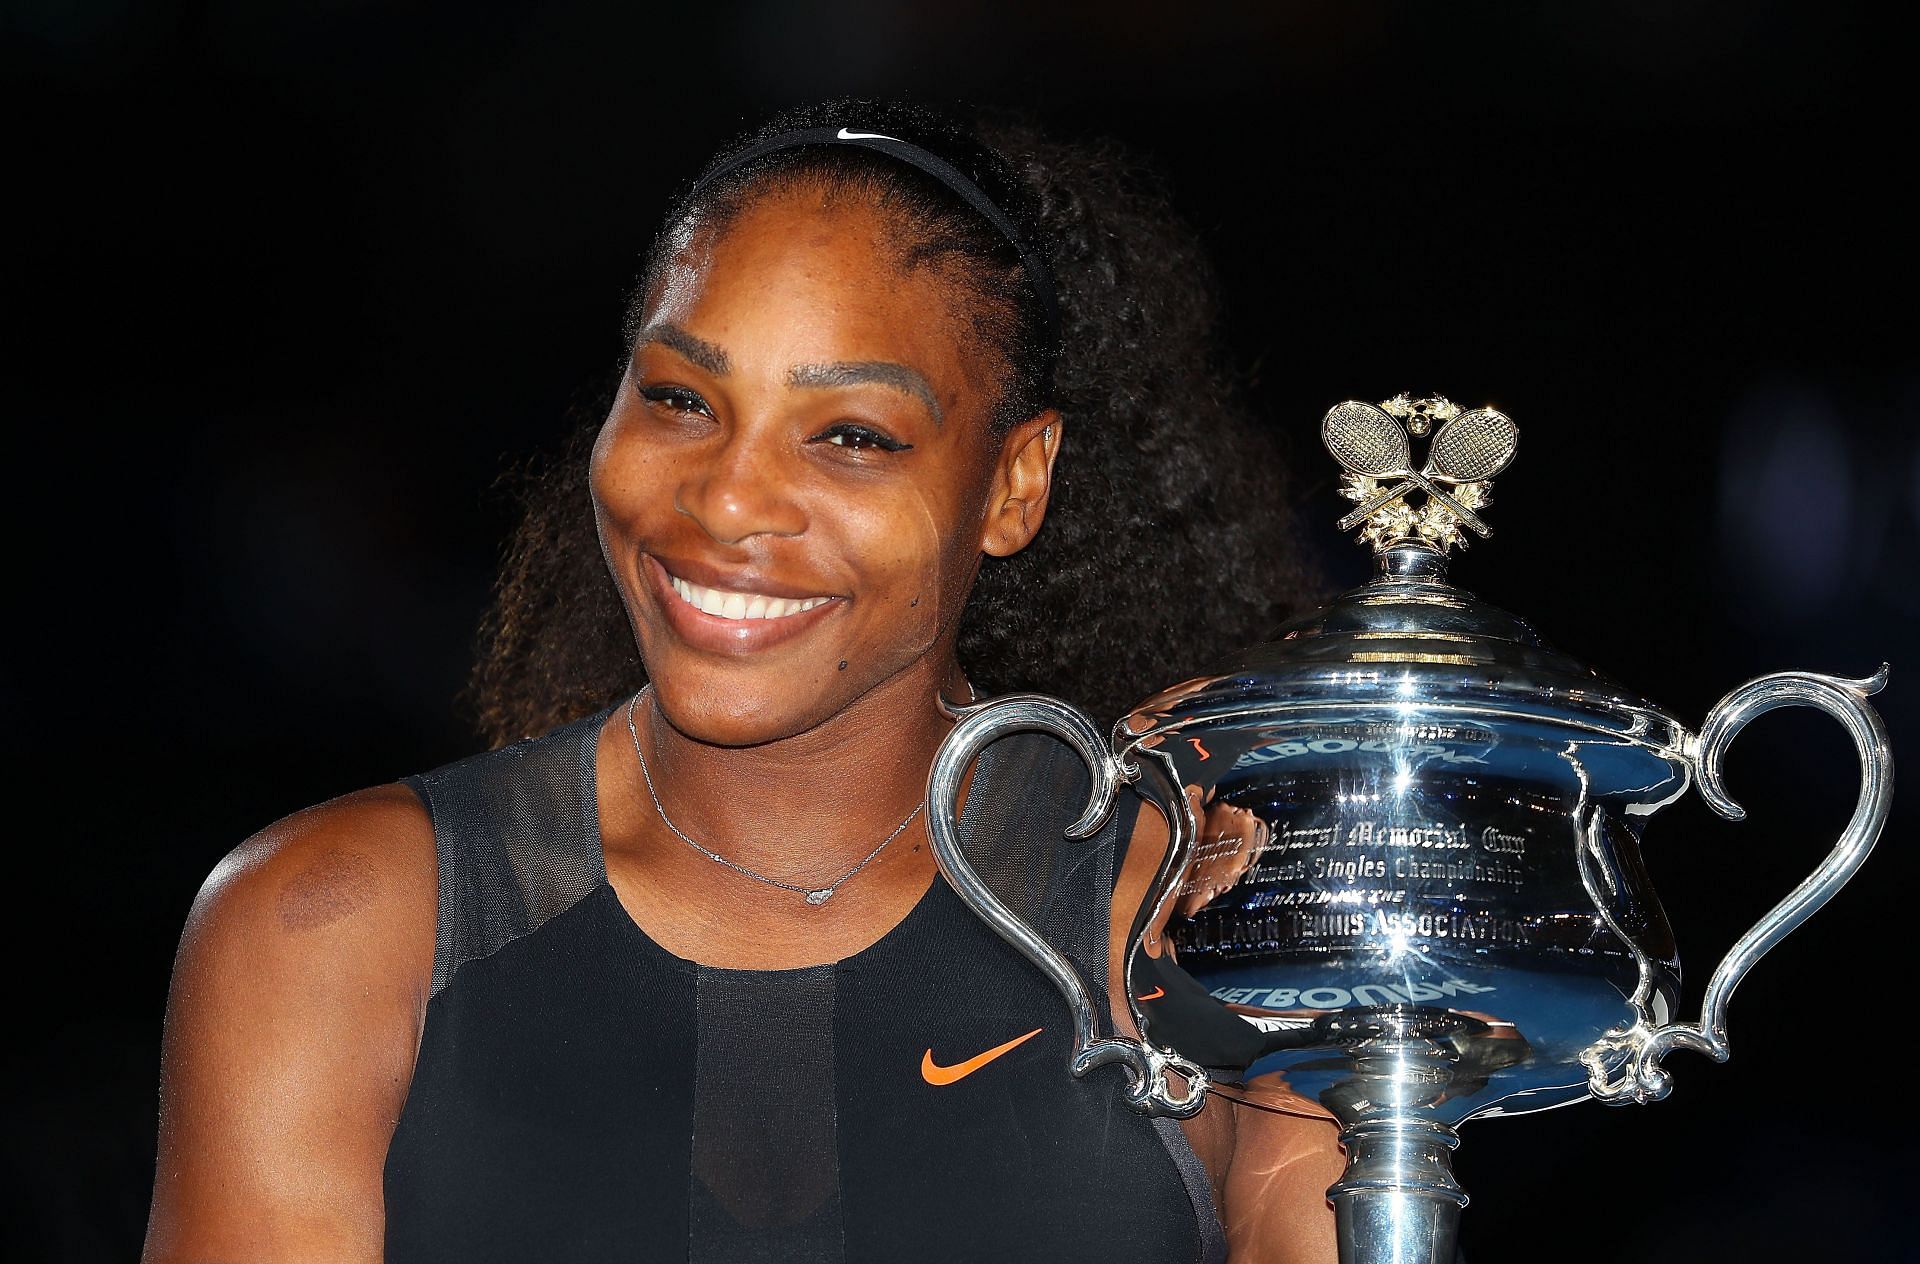 Serena Williams with the 2017 Australian Open trophy.